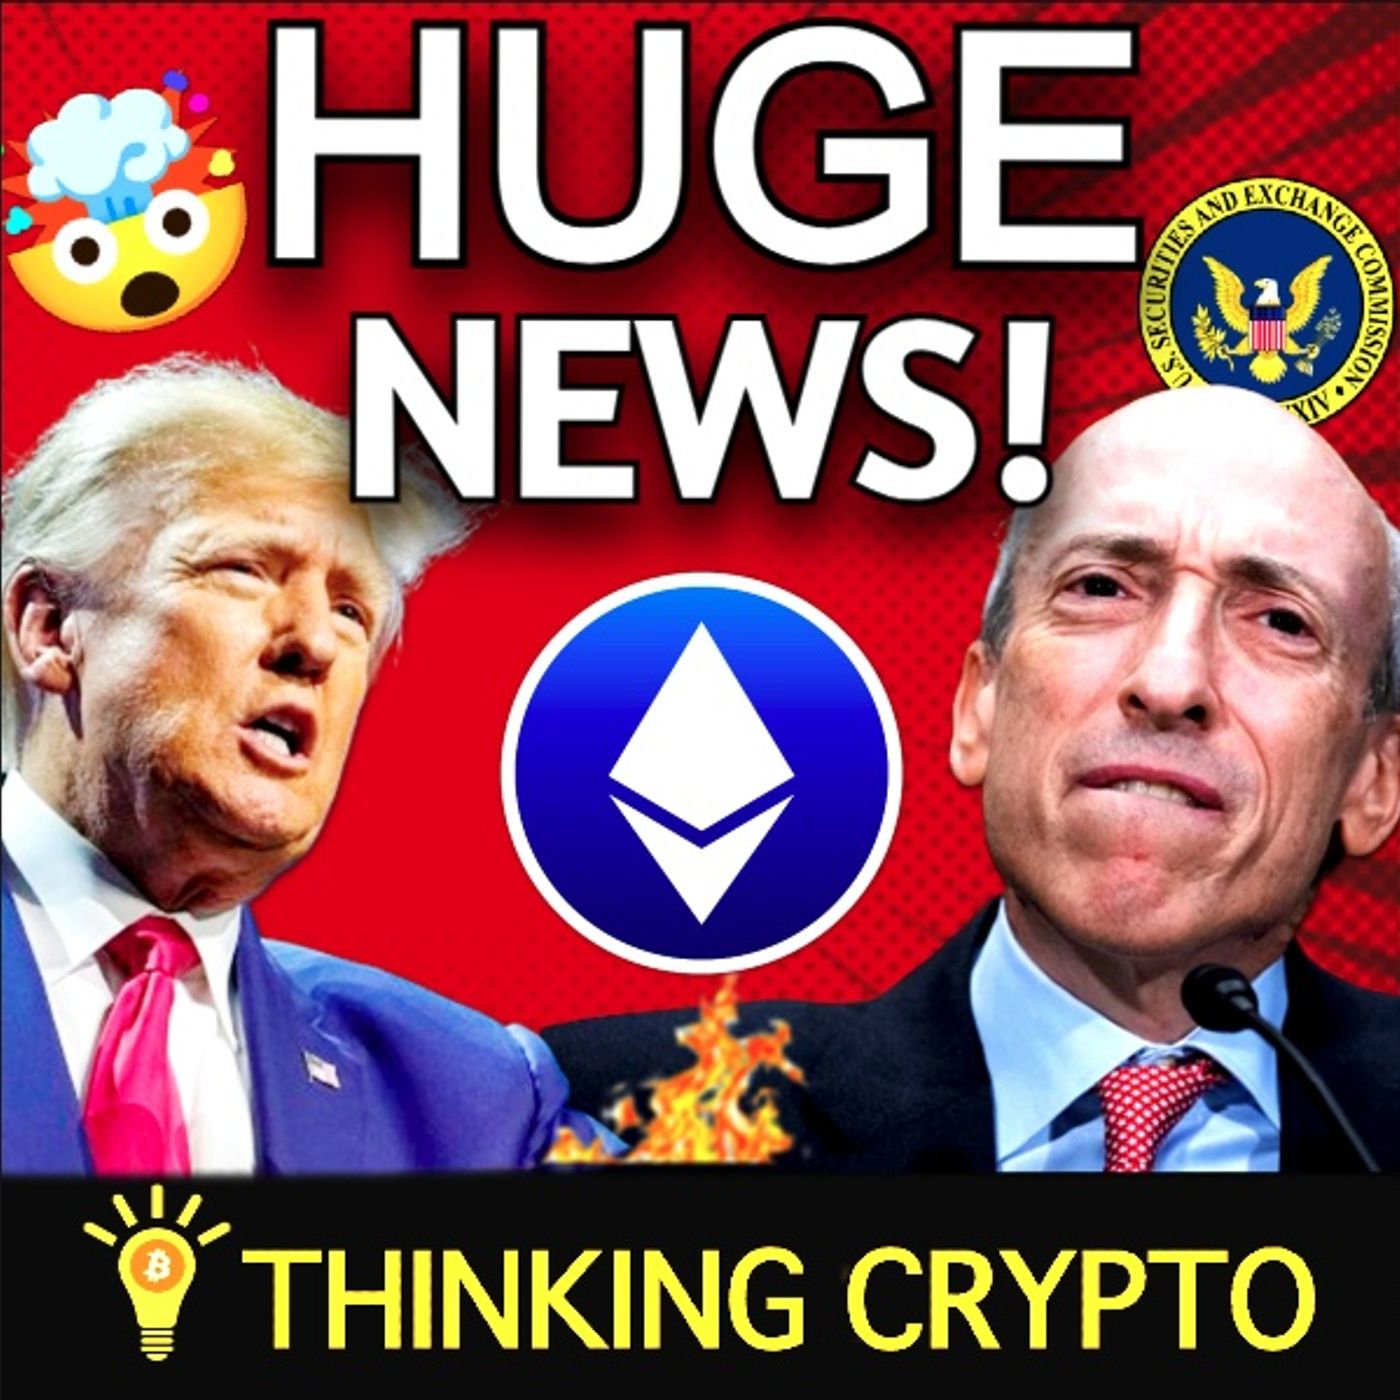 🚨DONALD TRUMP ACCEPTS CRYPTO & IS FORCING SEC GARY GENSLER TO APPROVE ETHEREUM ETFS!